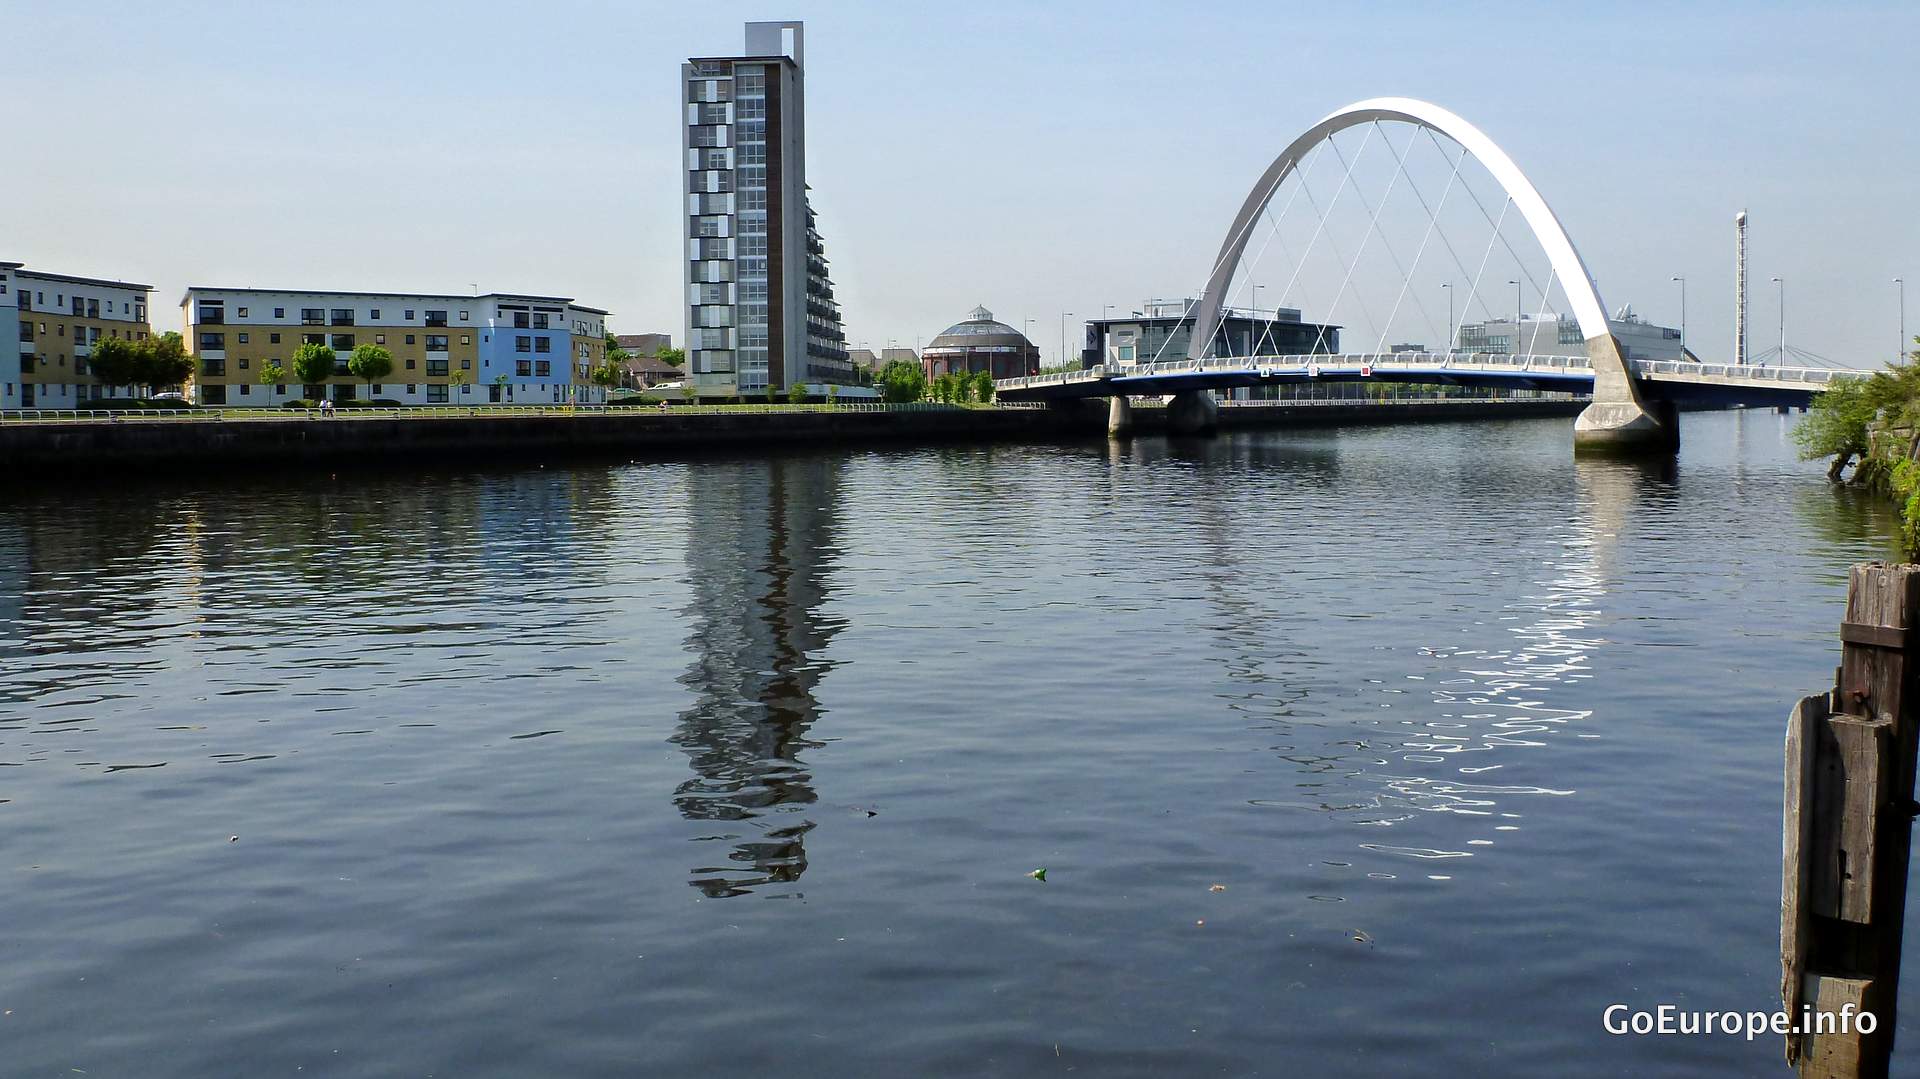 The river devides Glasgow in two parts.